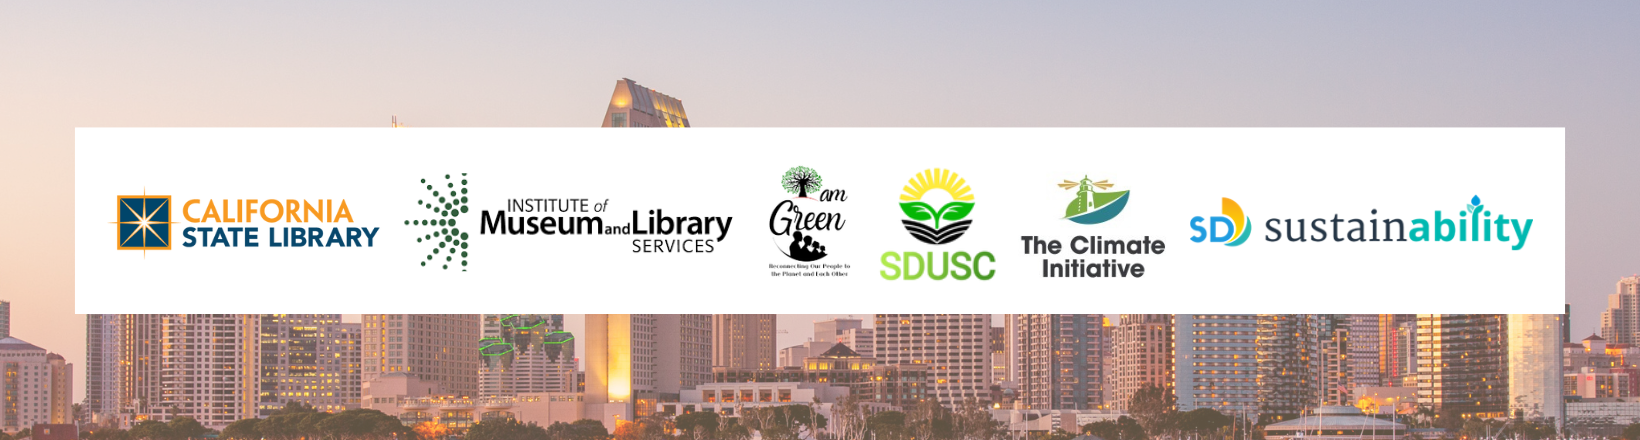 California State Library, IMLS, I am Green, SDUSC, The Climate Initaitive, and SD Sustainability logos San Diego Skyline 